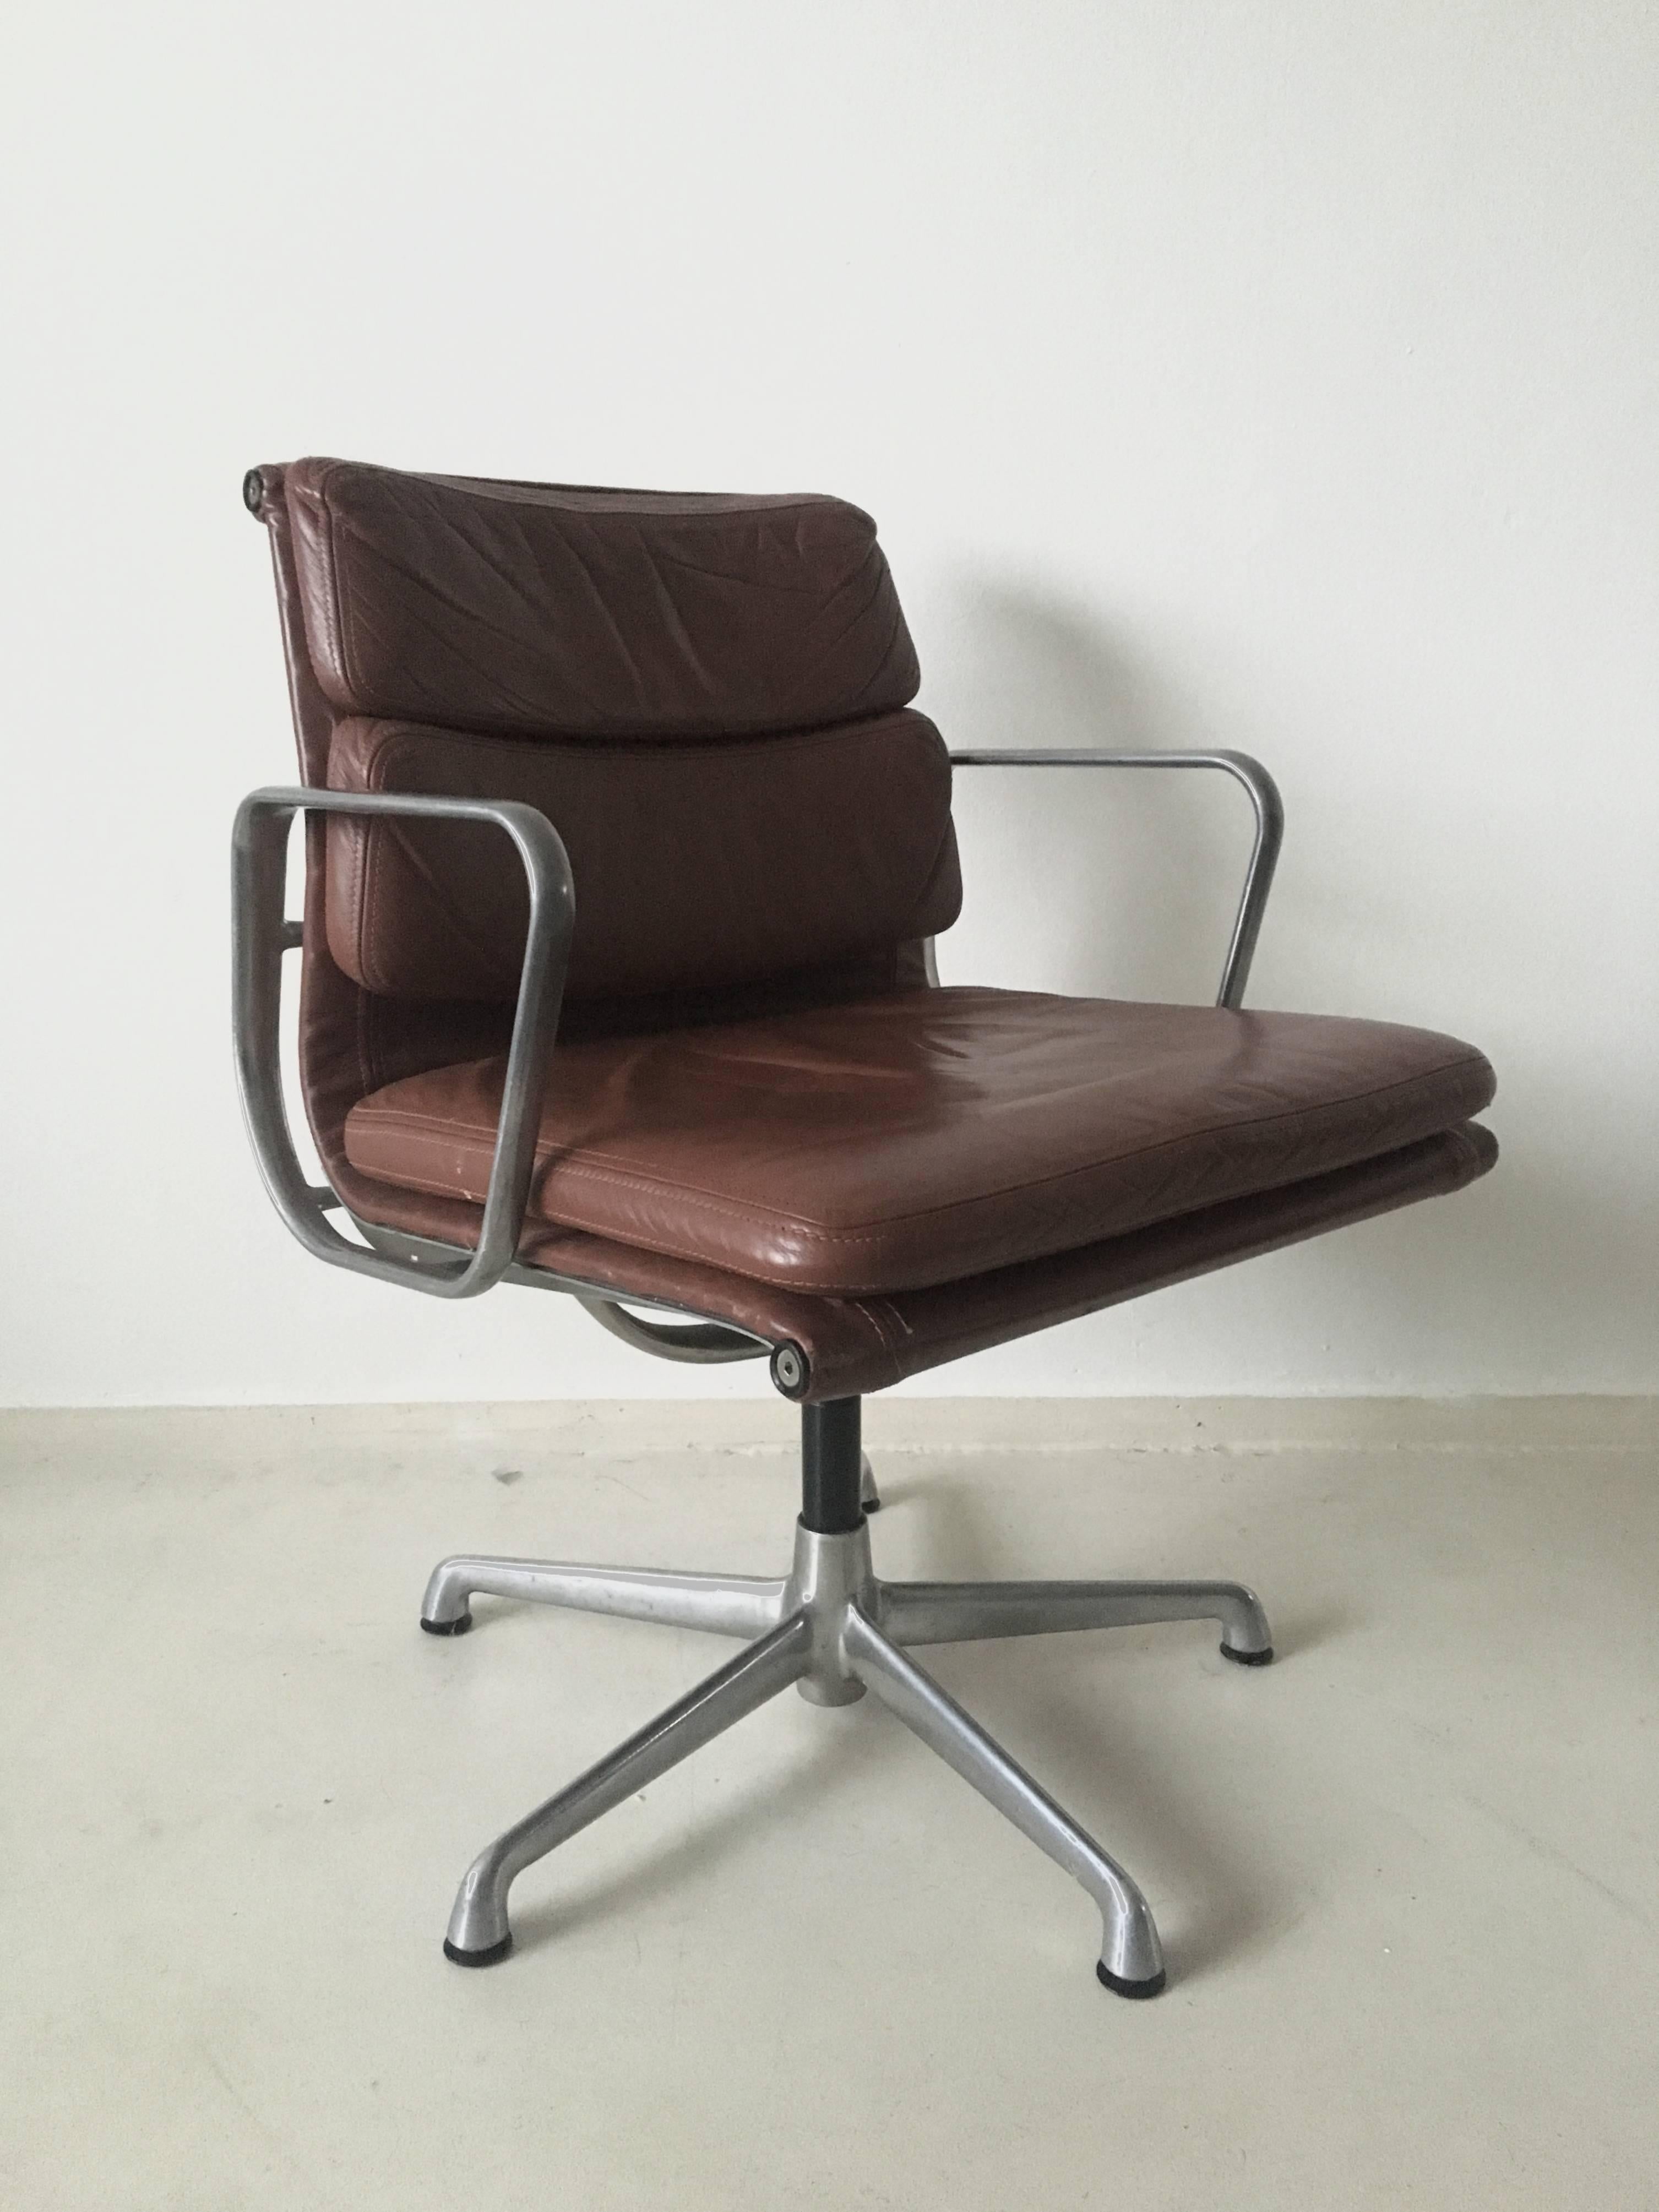 Italian Charles Eames Soft Pad Chairs EA208, for ICF Italy, 1960s (ONLY 1 LEFT)